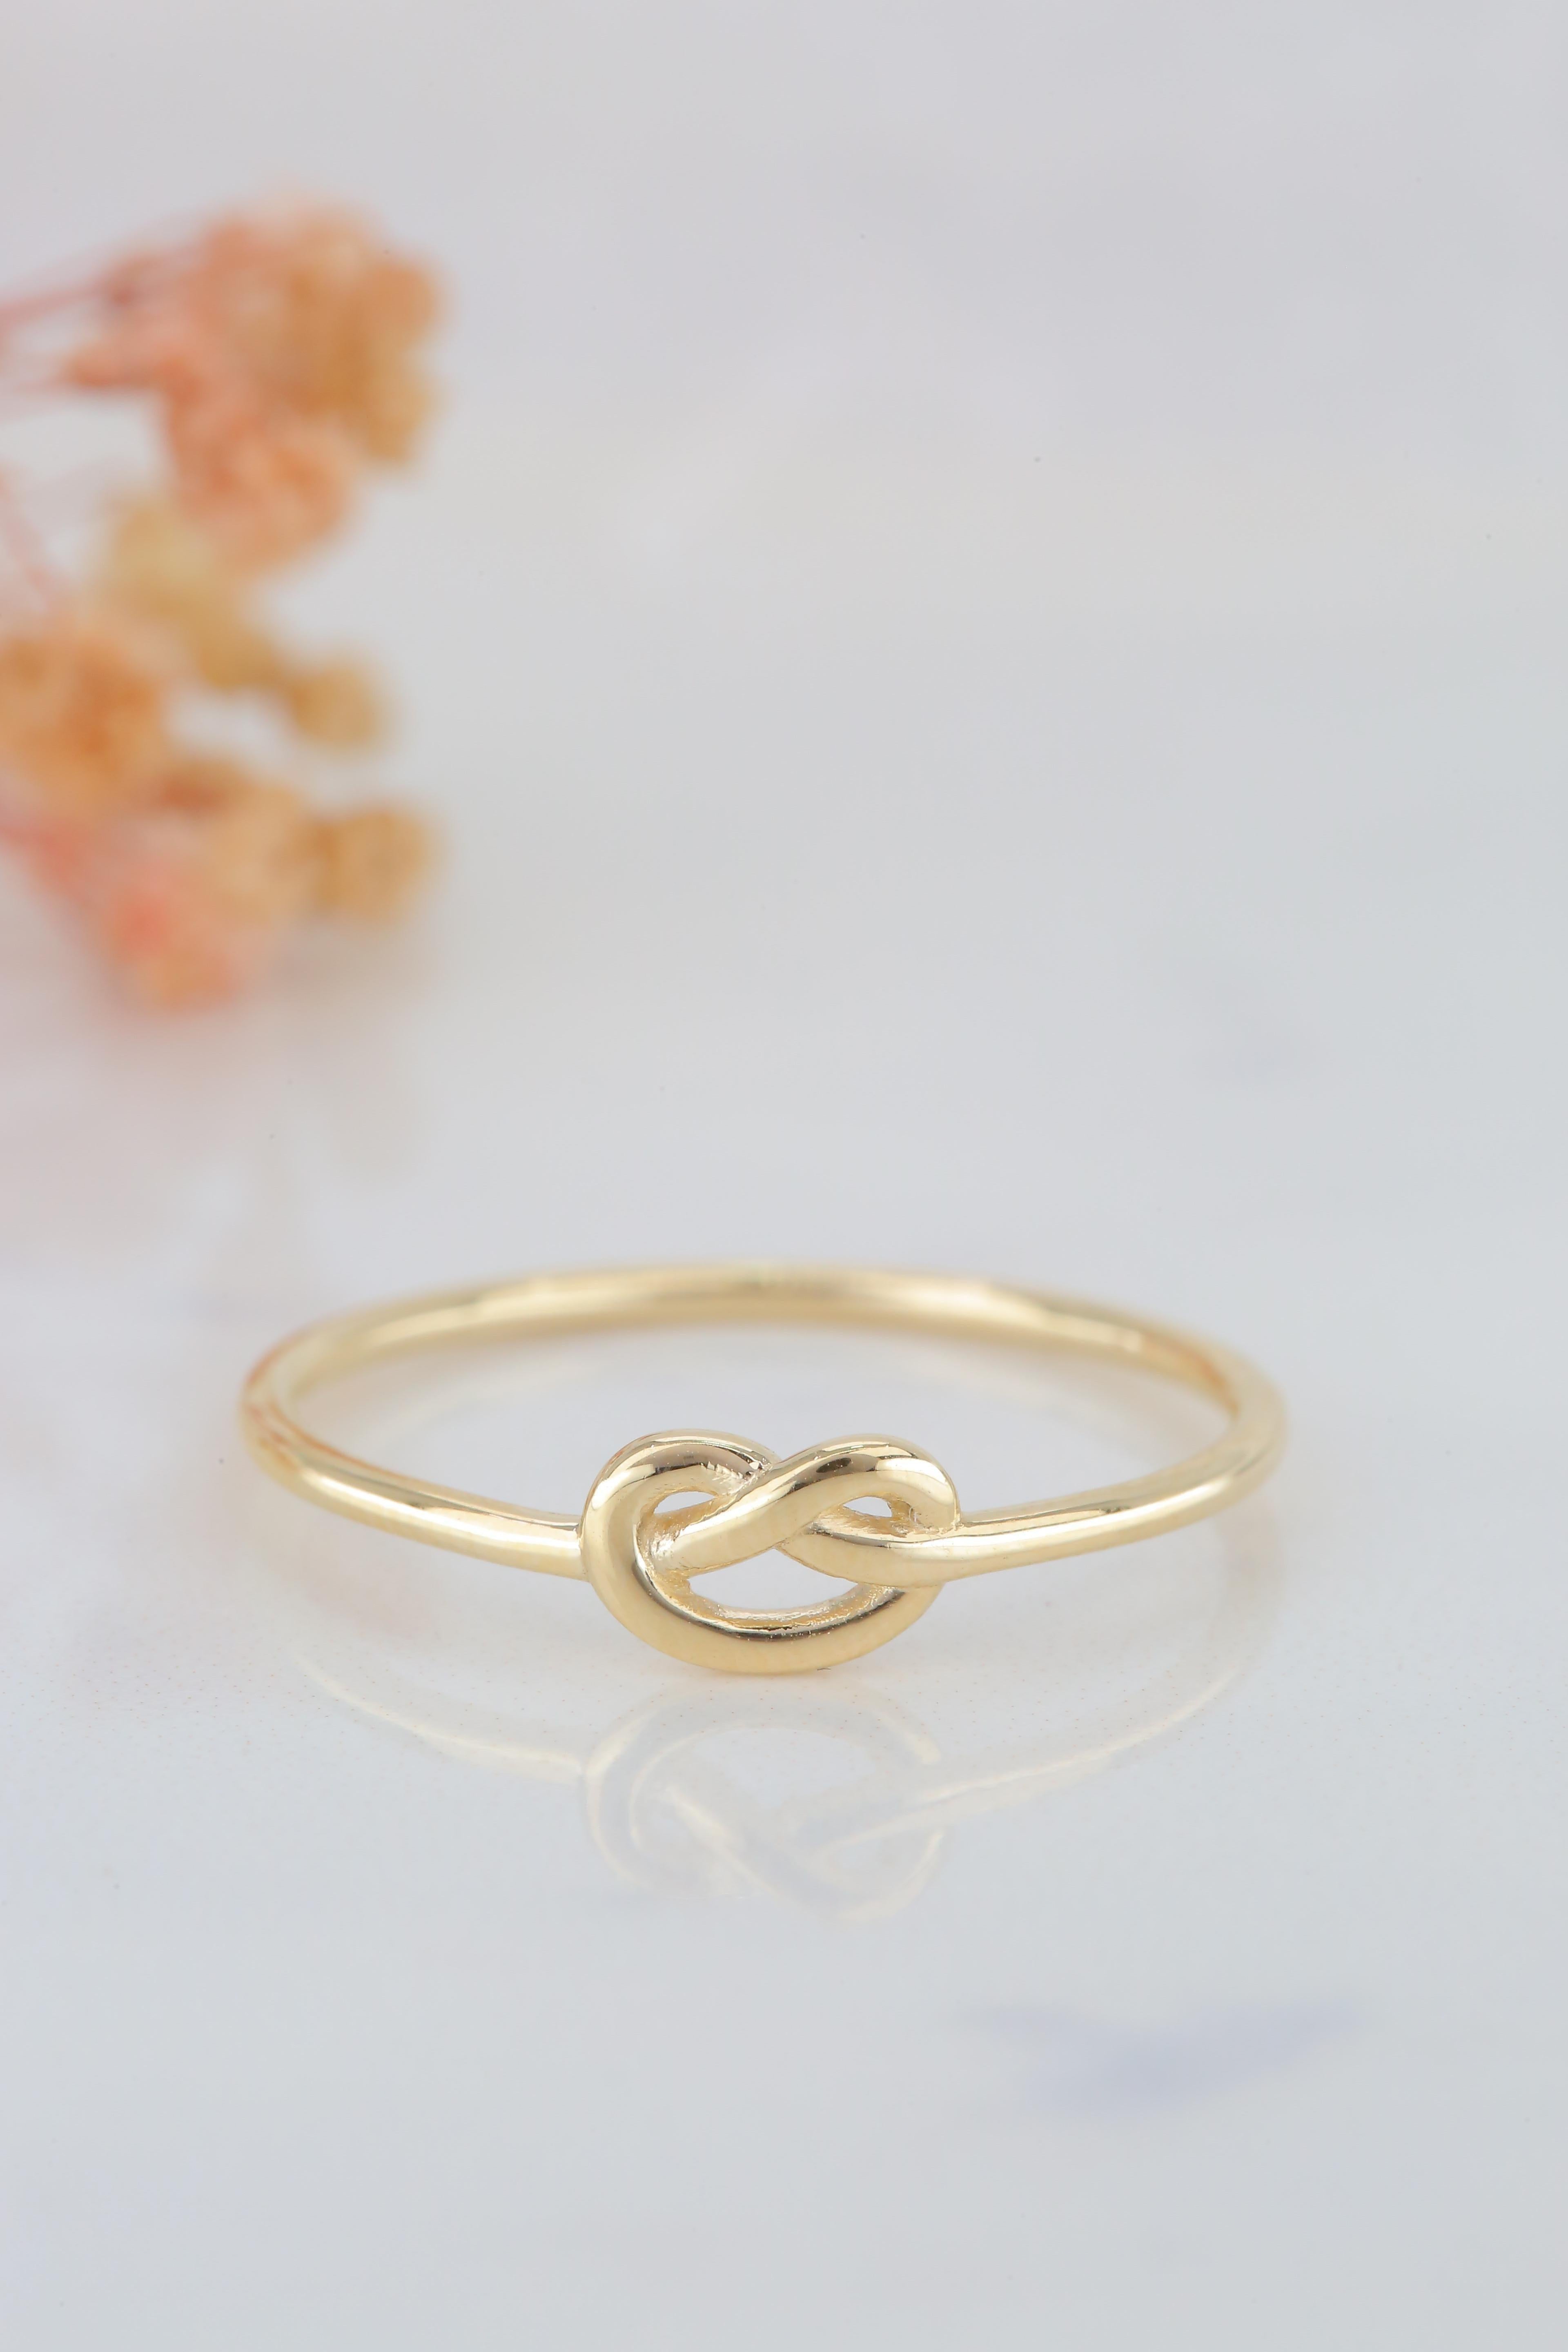 For Sale:  Gold Knot Ring, 14k Solid Gold, Dainty Ring, Minimalist Style Ring, Promise Ring 5